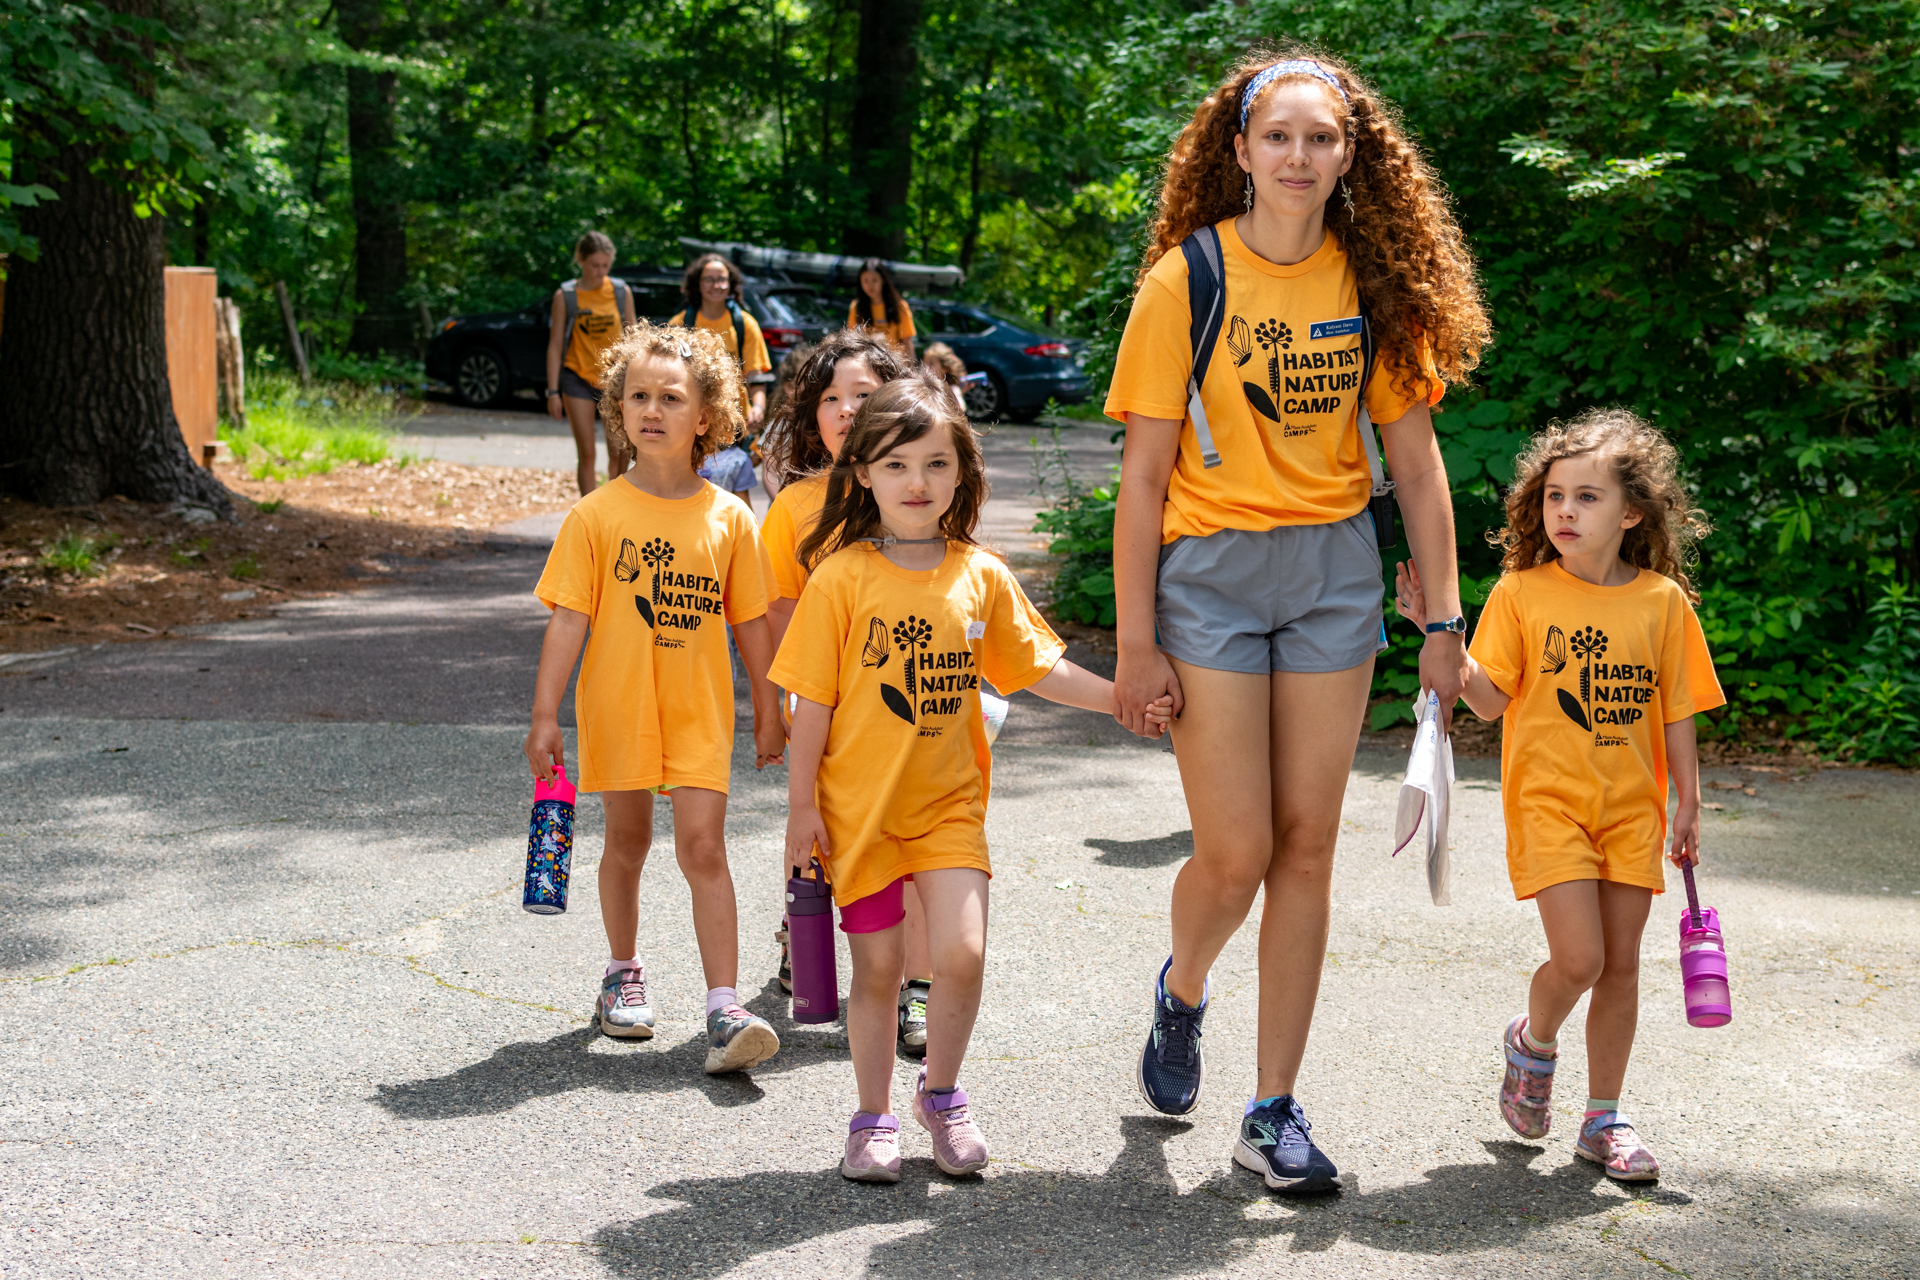 A counselor at Habitat Nature Camp walking and holding hands with two campers